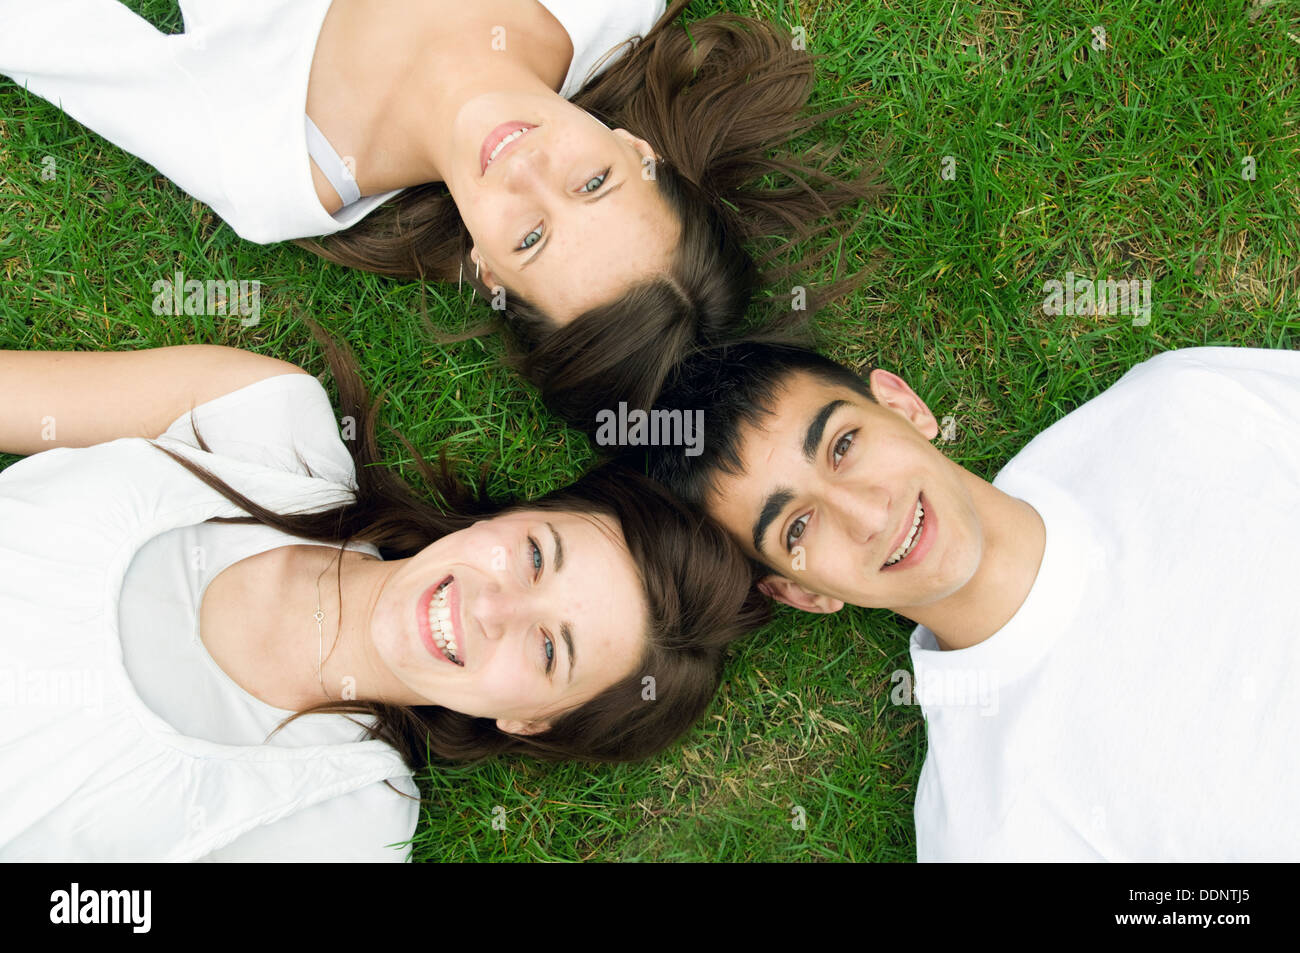 Three young happy friends lying down together Stock Photo